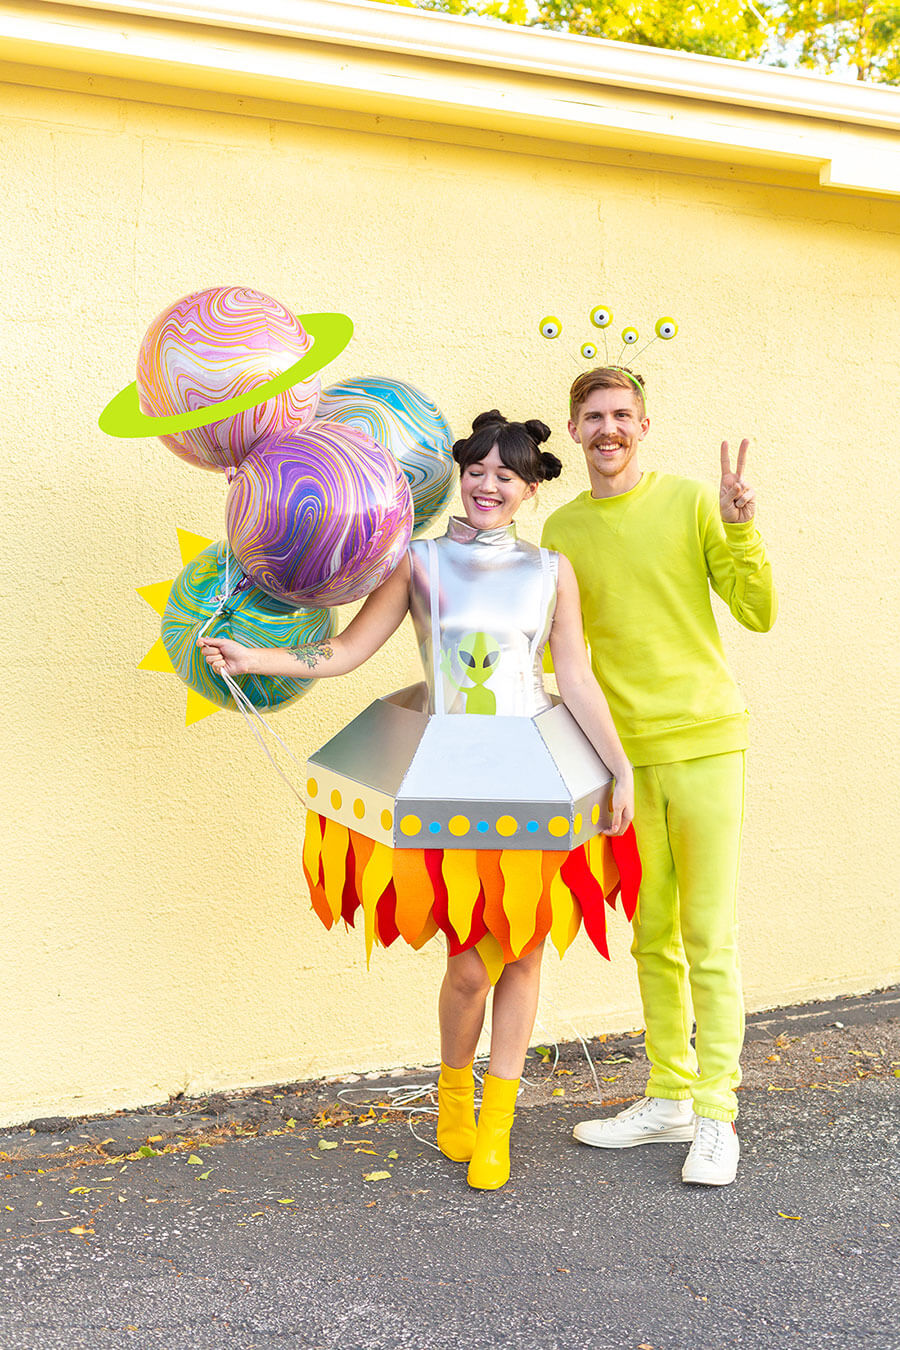 creative homemade couples costumes